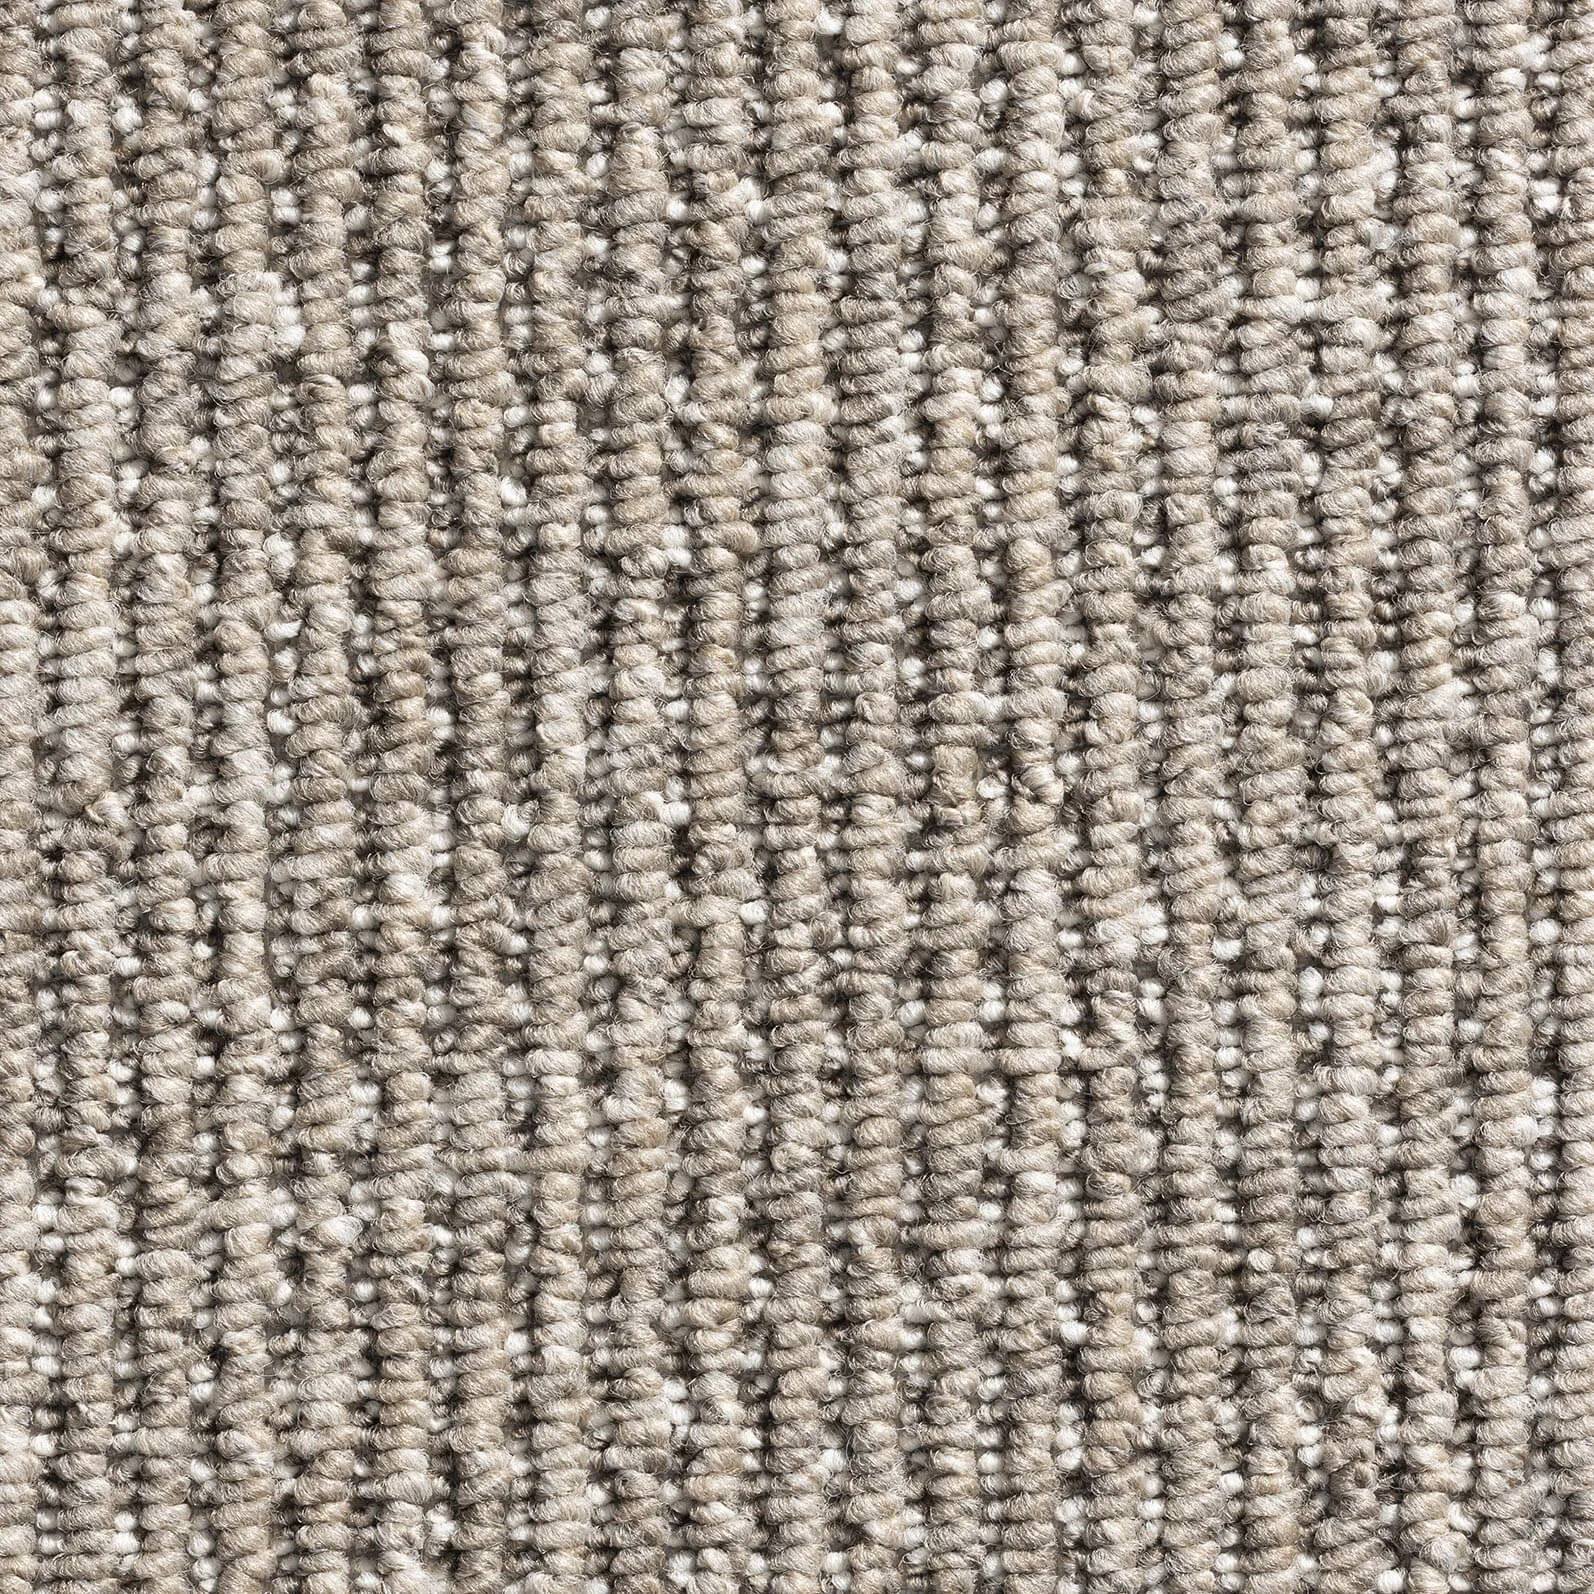 Manchester Loop Carpet - 4215 Taupe